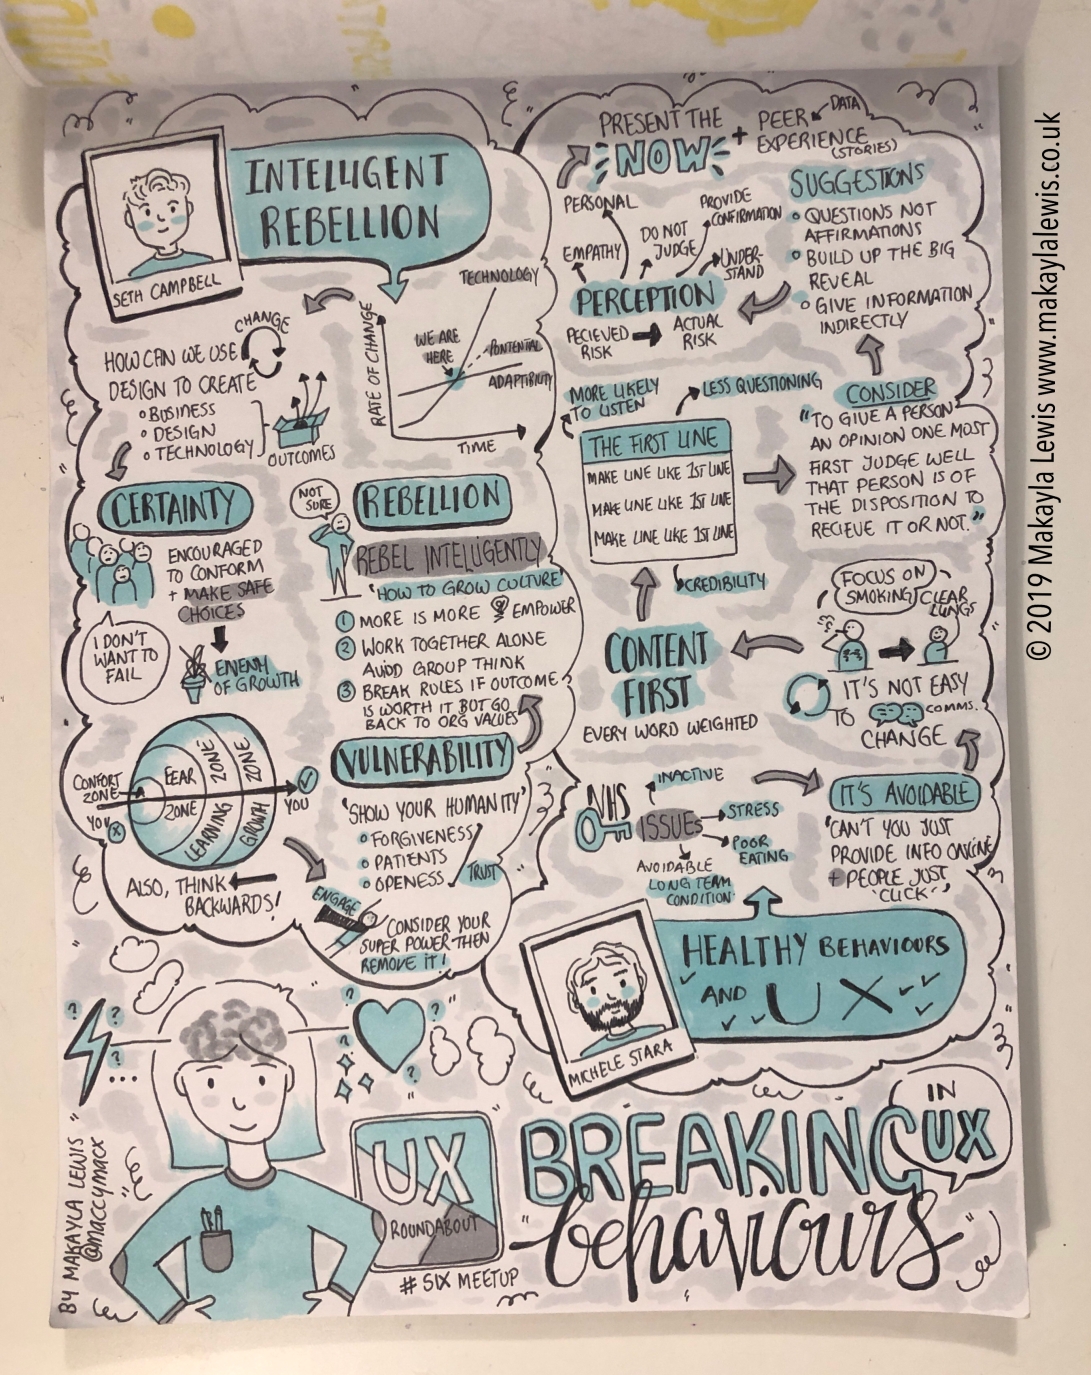 Sketchnotes from UX Roundabout 'Breaking Behaviours in UX - UX Roundabout #6 @ Big Radical'